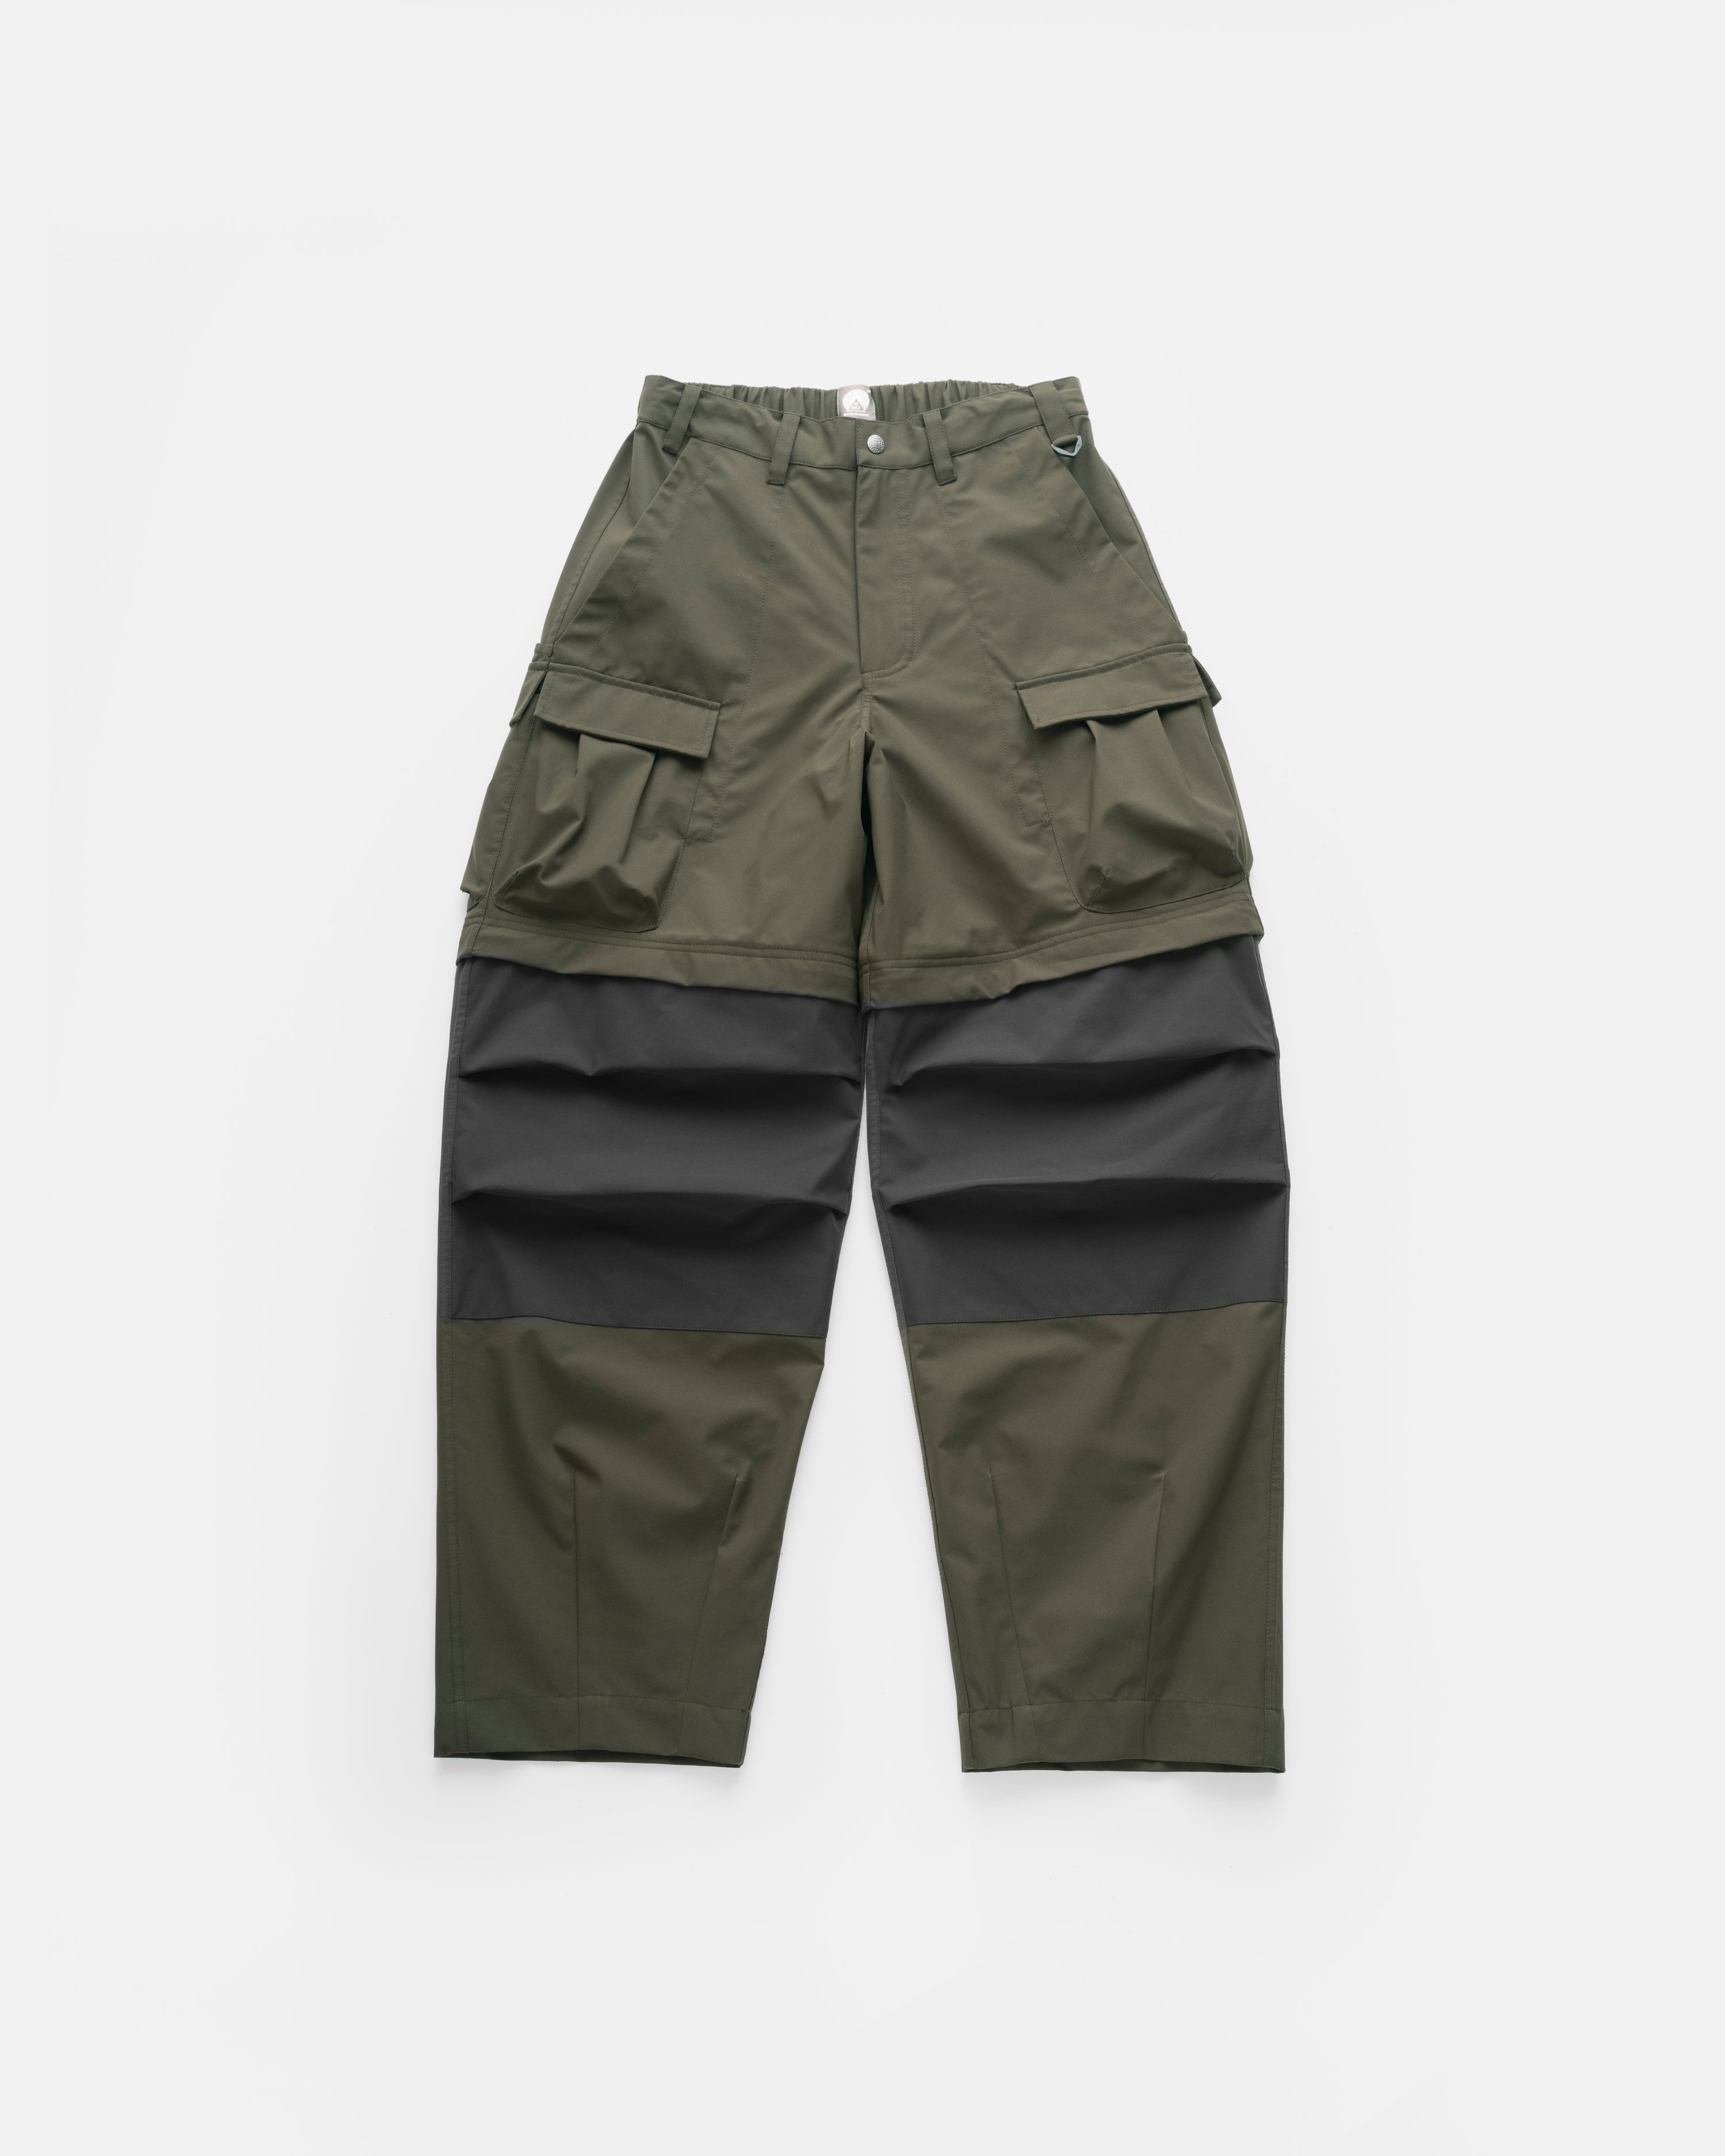 CASCADE OUTDOOR PROTECTION SYSTEM CONVERTIBLE CARGO PANT - O.D. GREEN / WASHED BLACK WATER-REPELLENT BONDED MEMBRANE